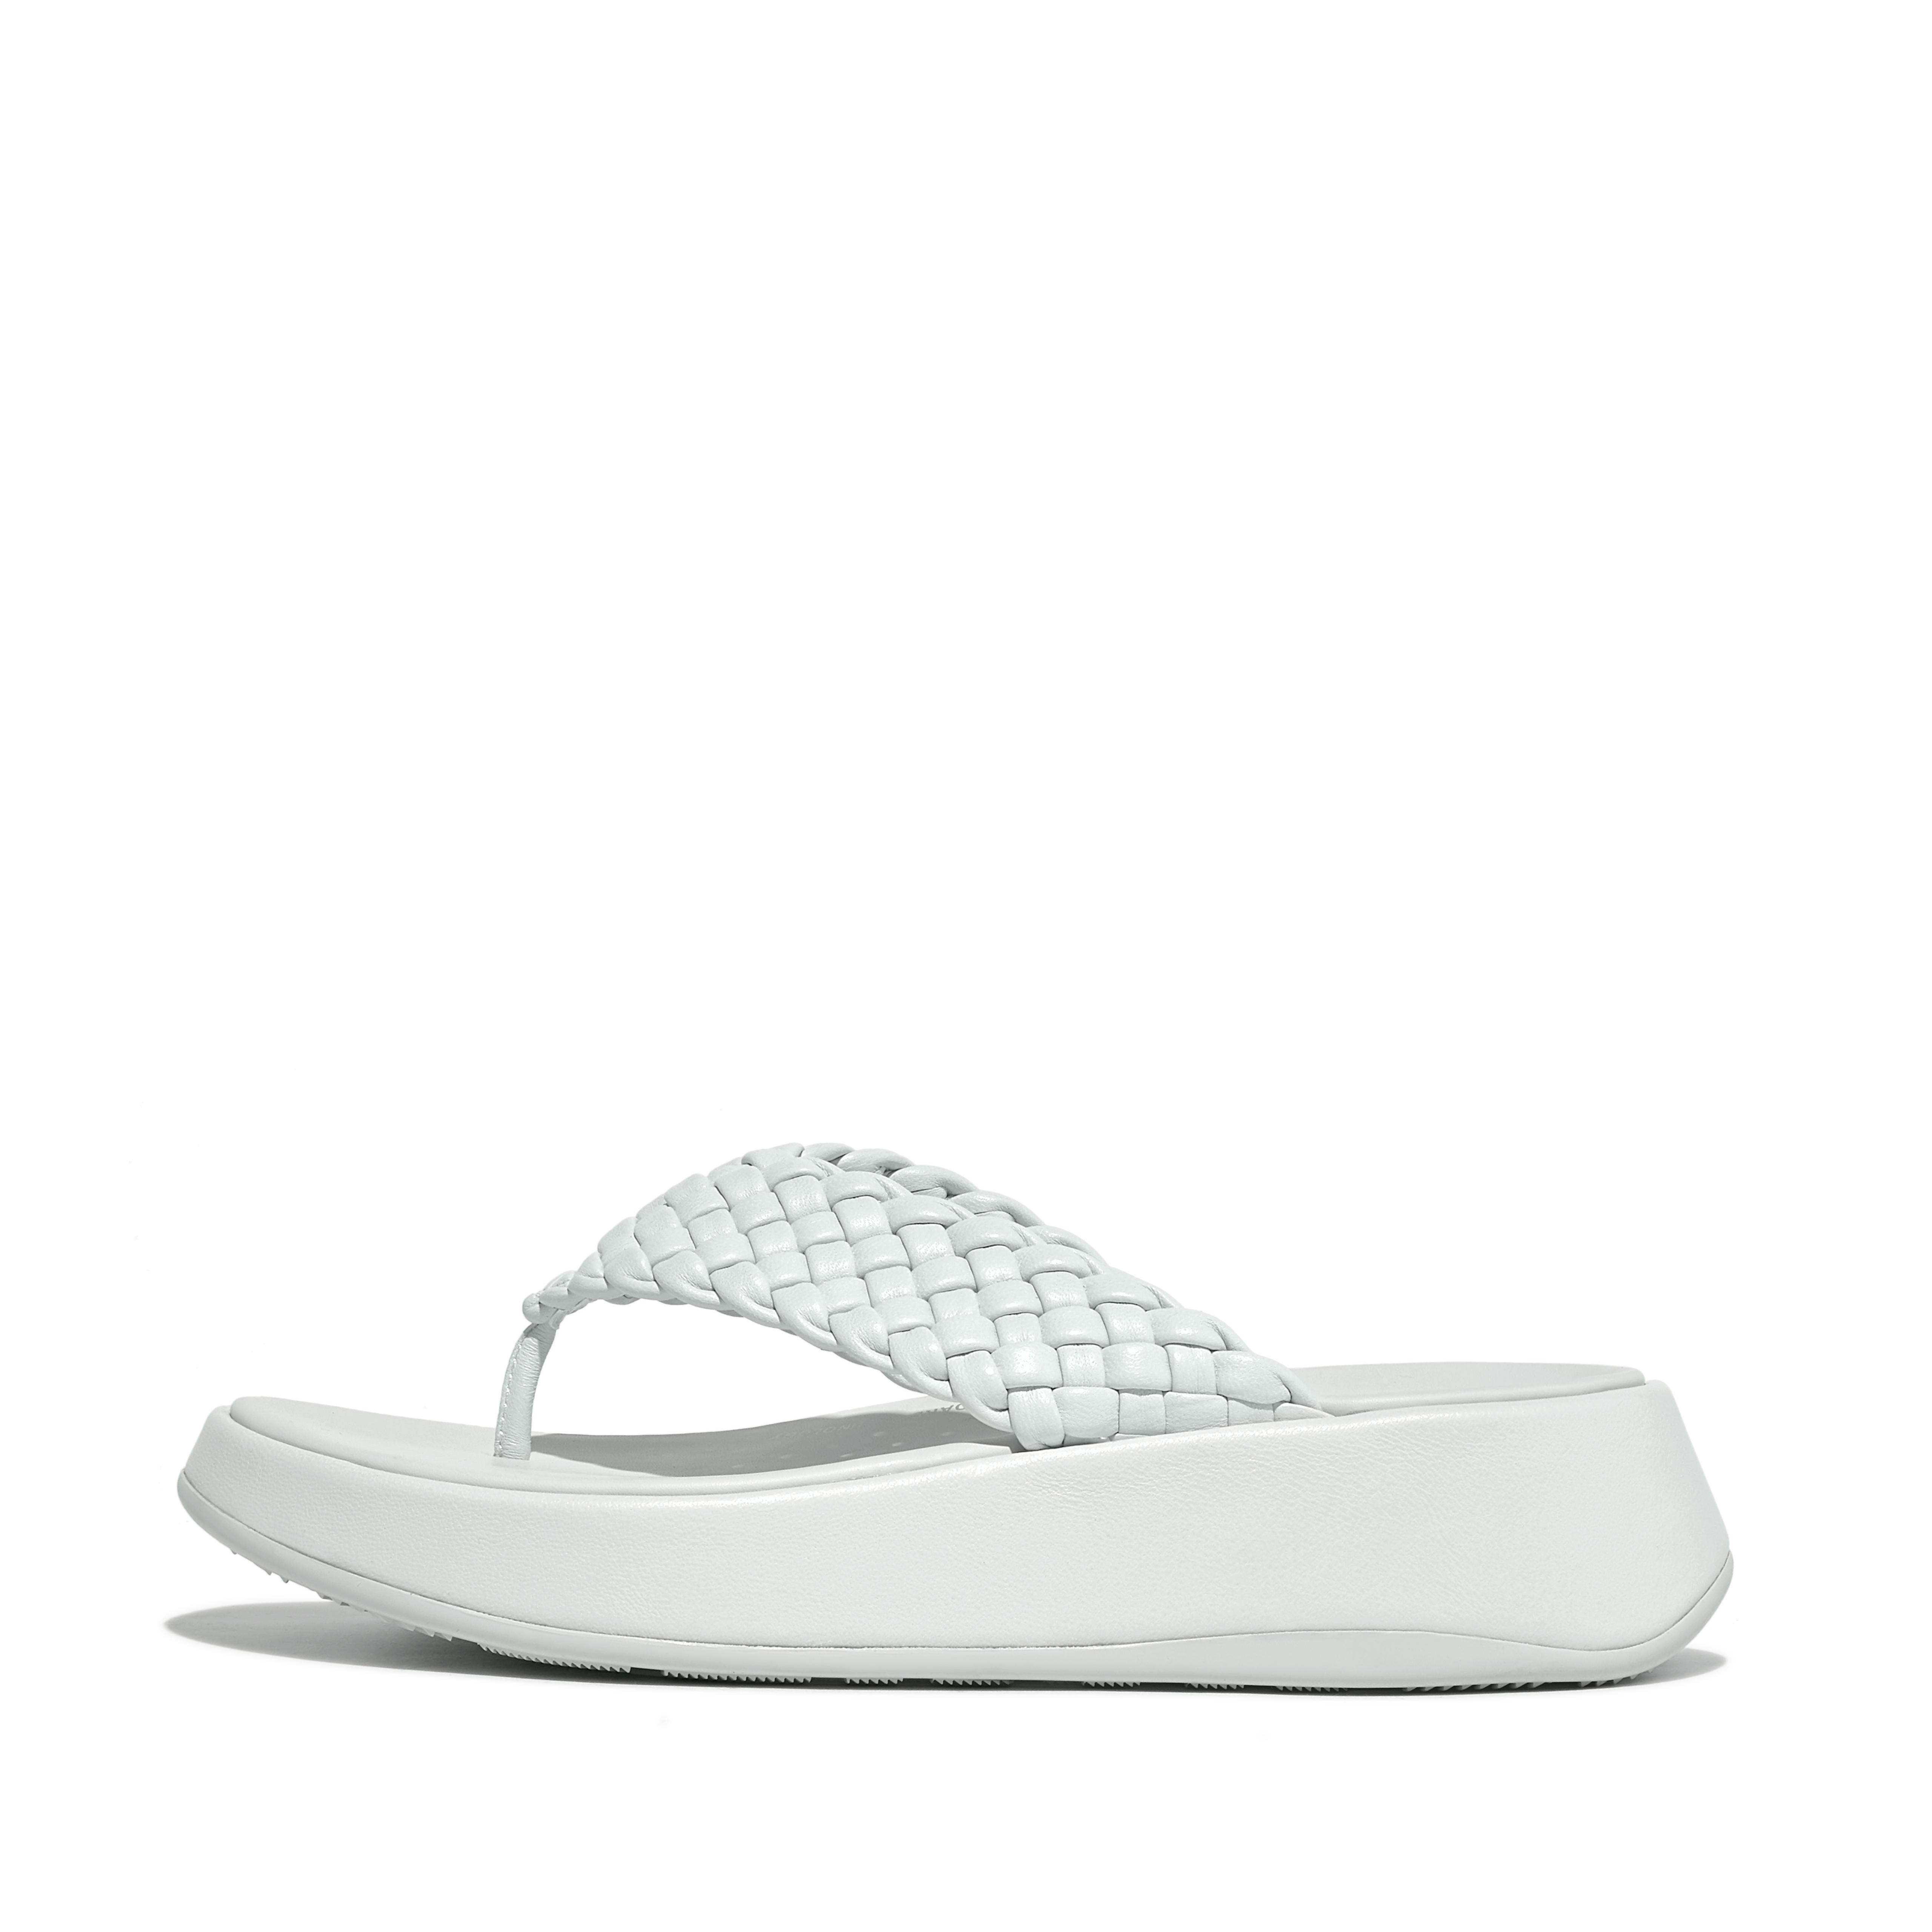 Fitflop Woven-Leather Flatform Toe-Post Sandals